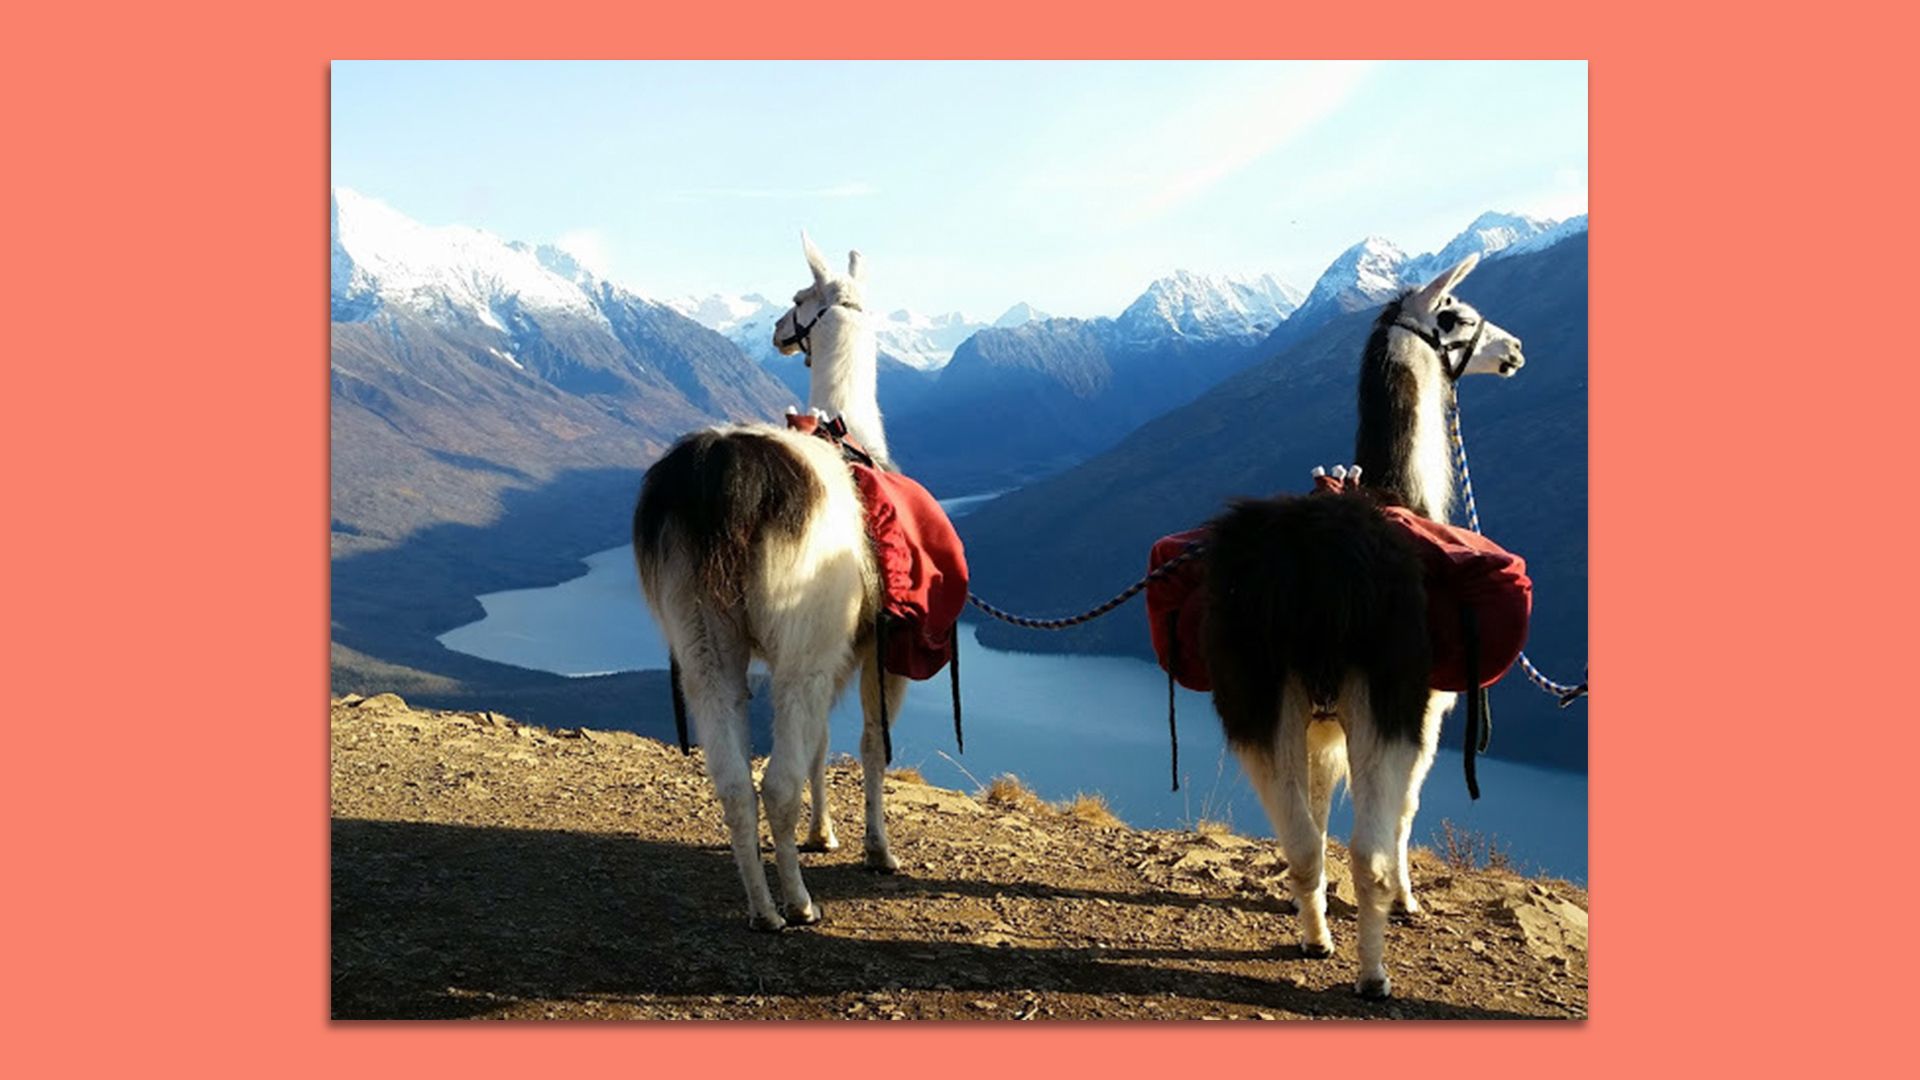 Two pack llamas look out on the Alaska wilderness.